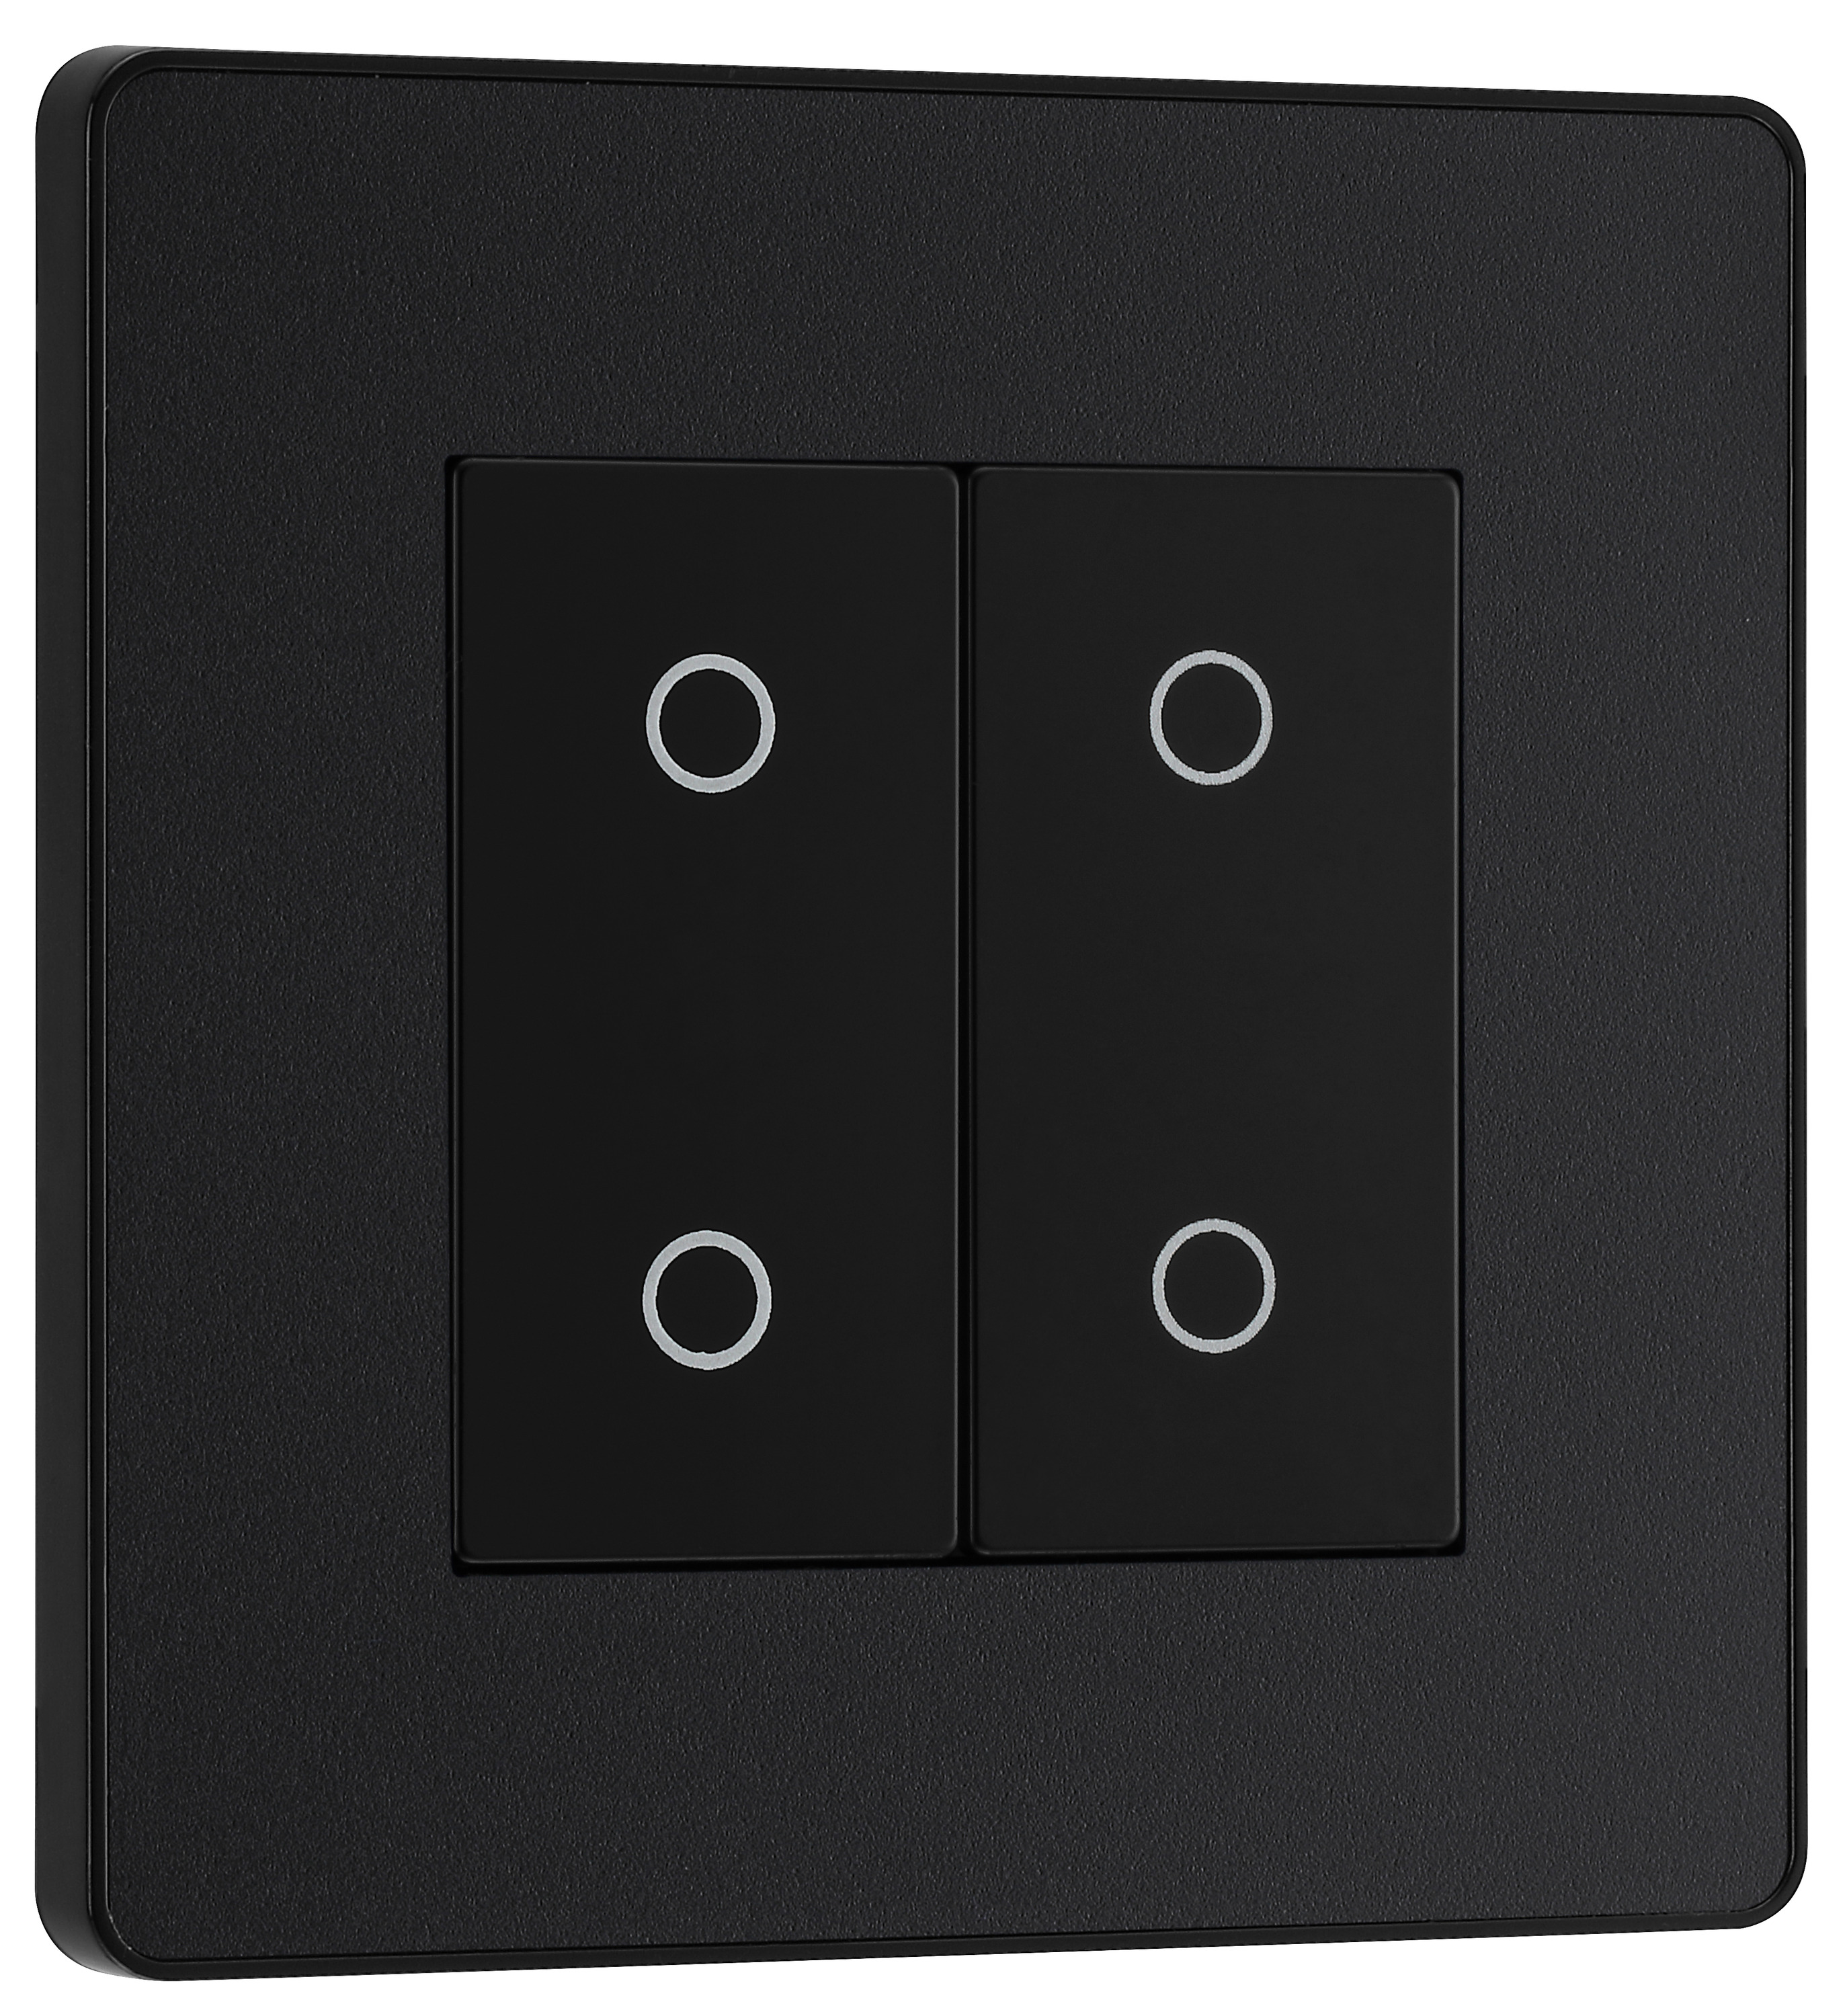 Image of BG Evolve Secondary Matt Black 2 Way Double Touch Dimmer Switch - 200W